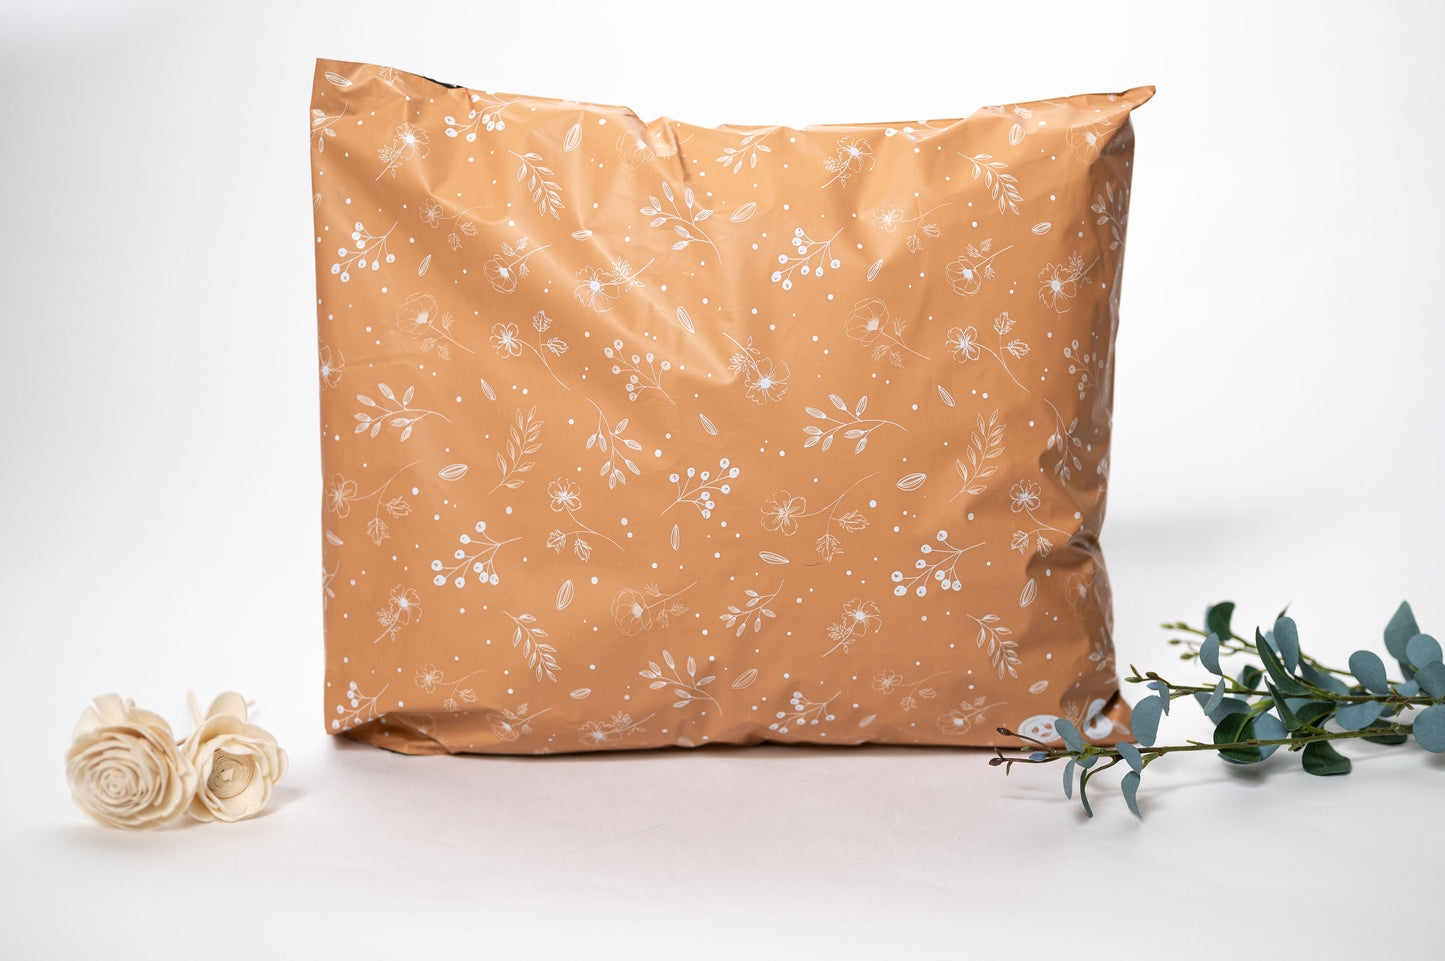 A Floral 2D Chestnut Biodegradable Mailer 12" x 15.5" with a flower next to it, made from a recyclable material, from impack.co.